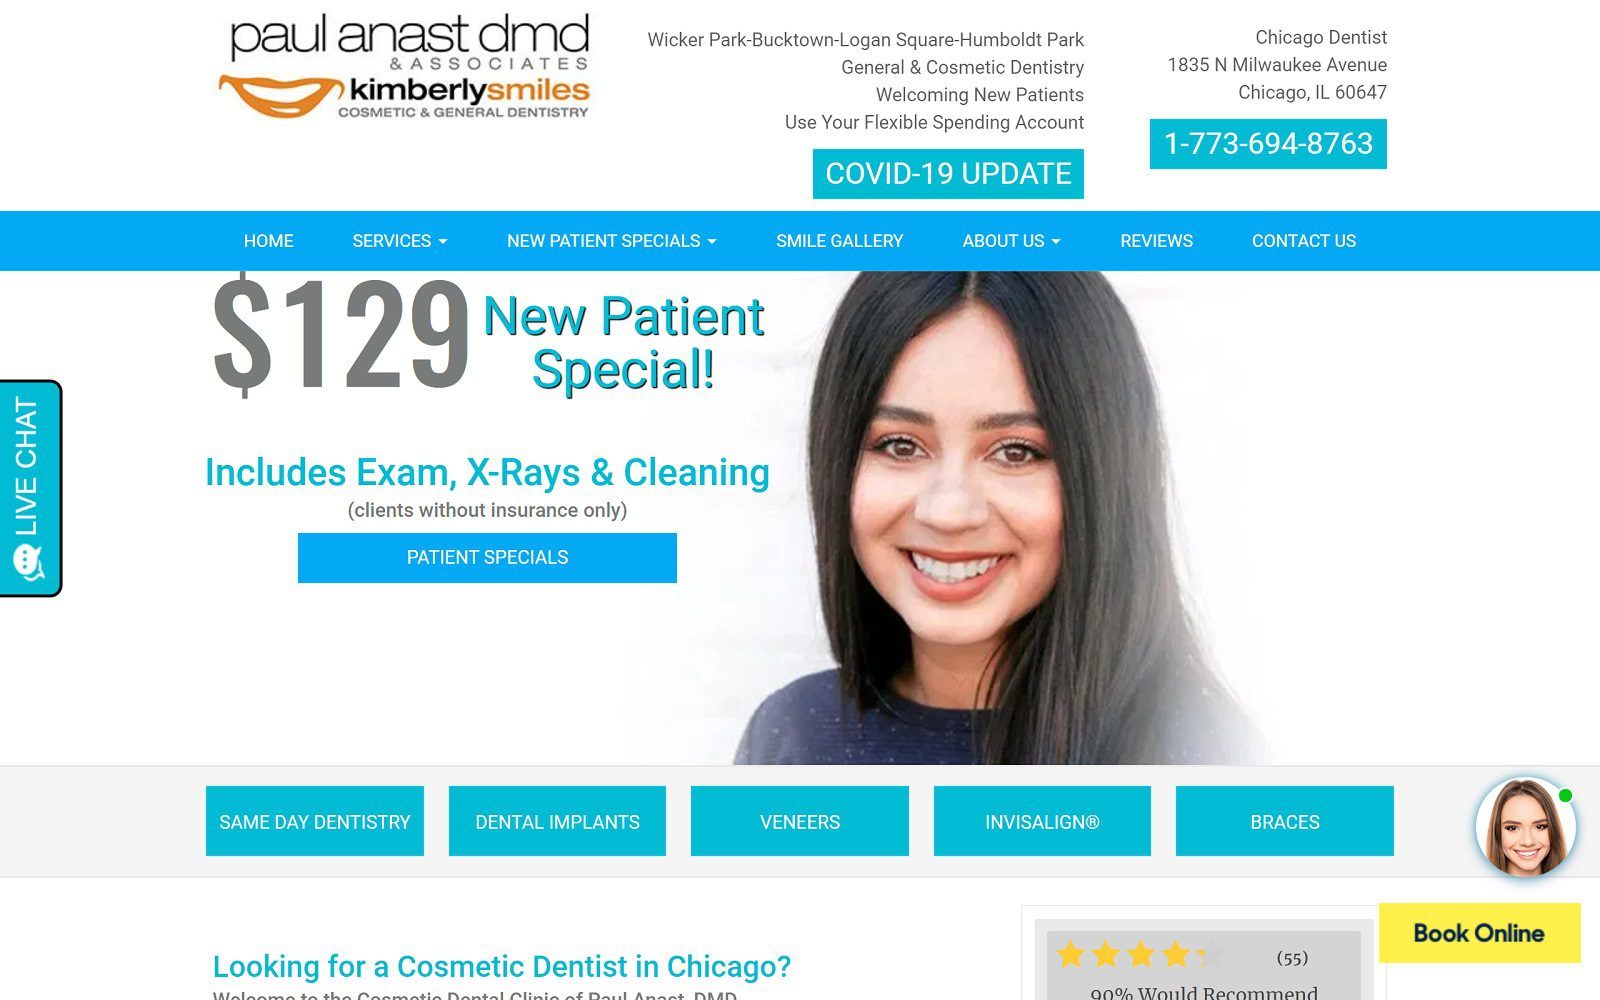 The Screenshot of Kimberly Smiles Cosmetic & General Dentistry Dr. Paul Anast Website